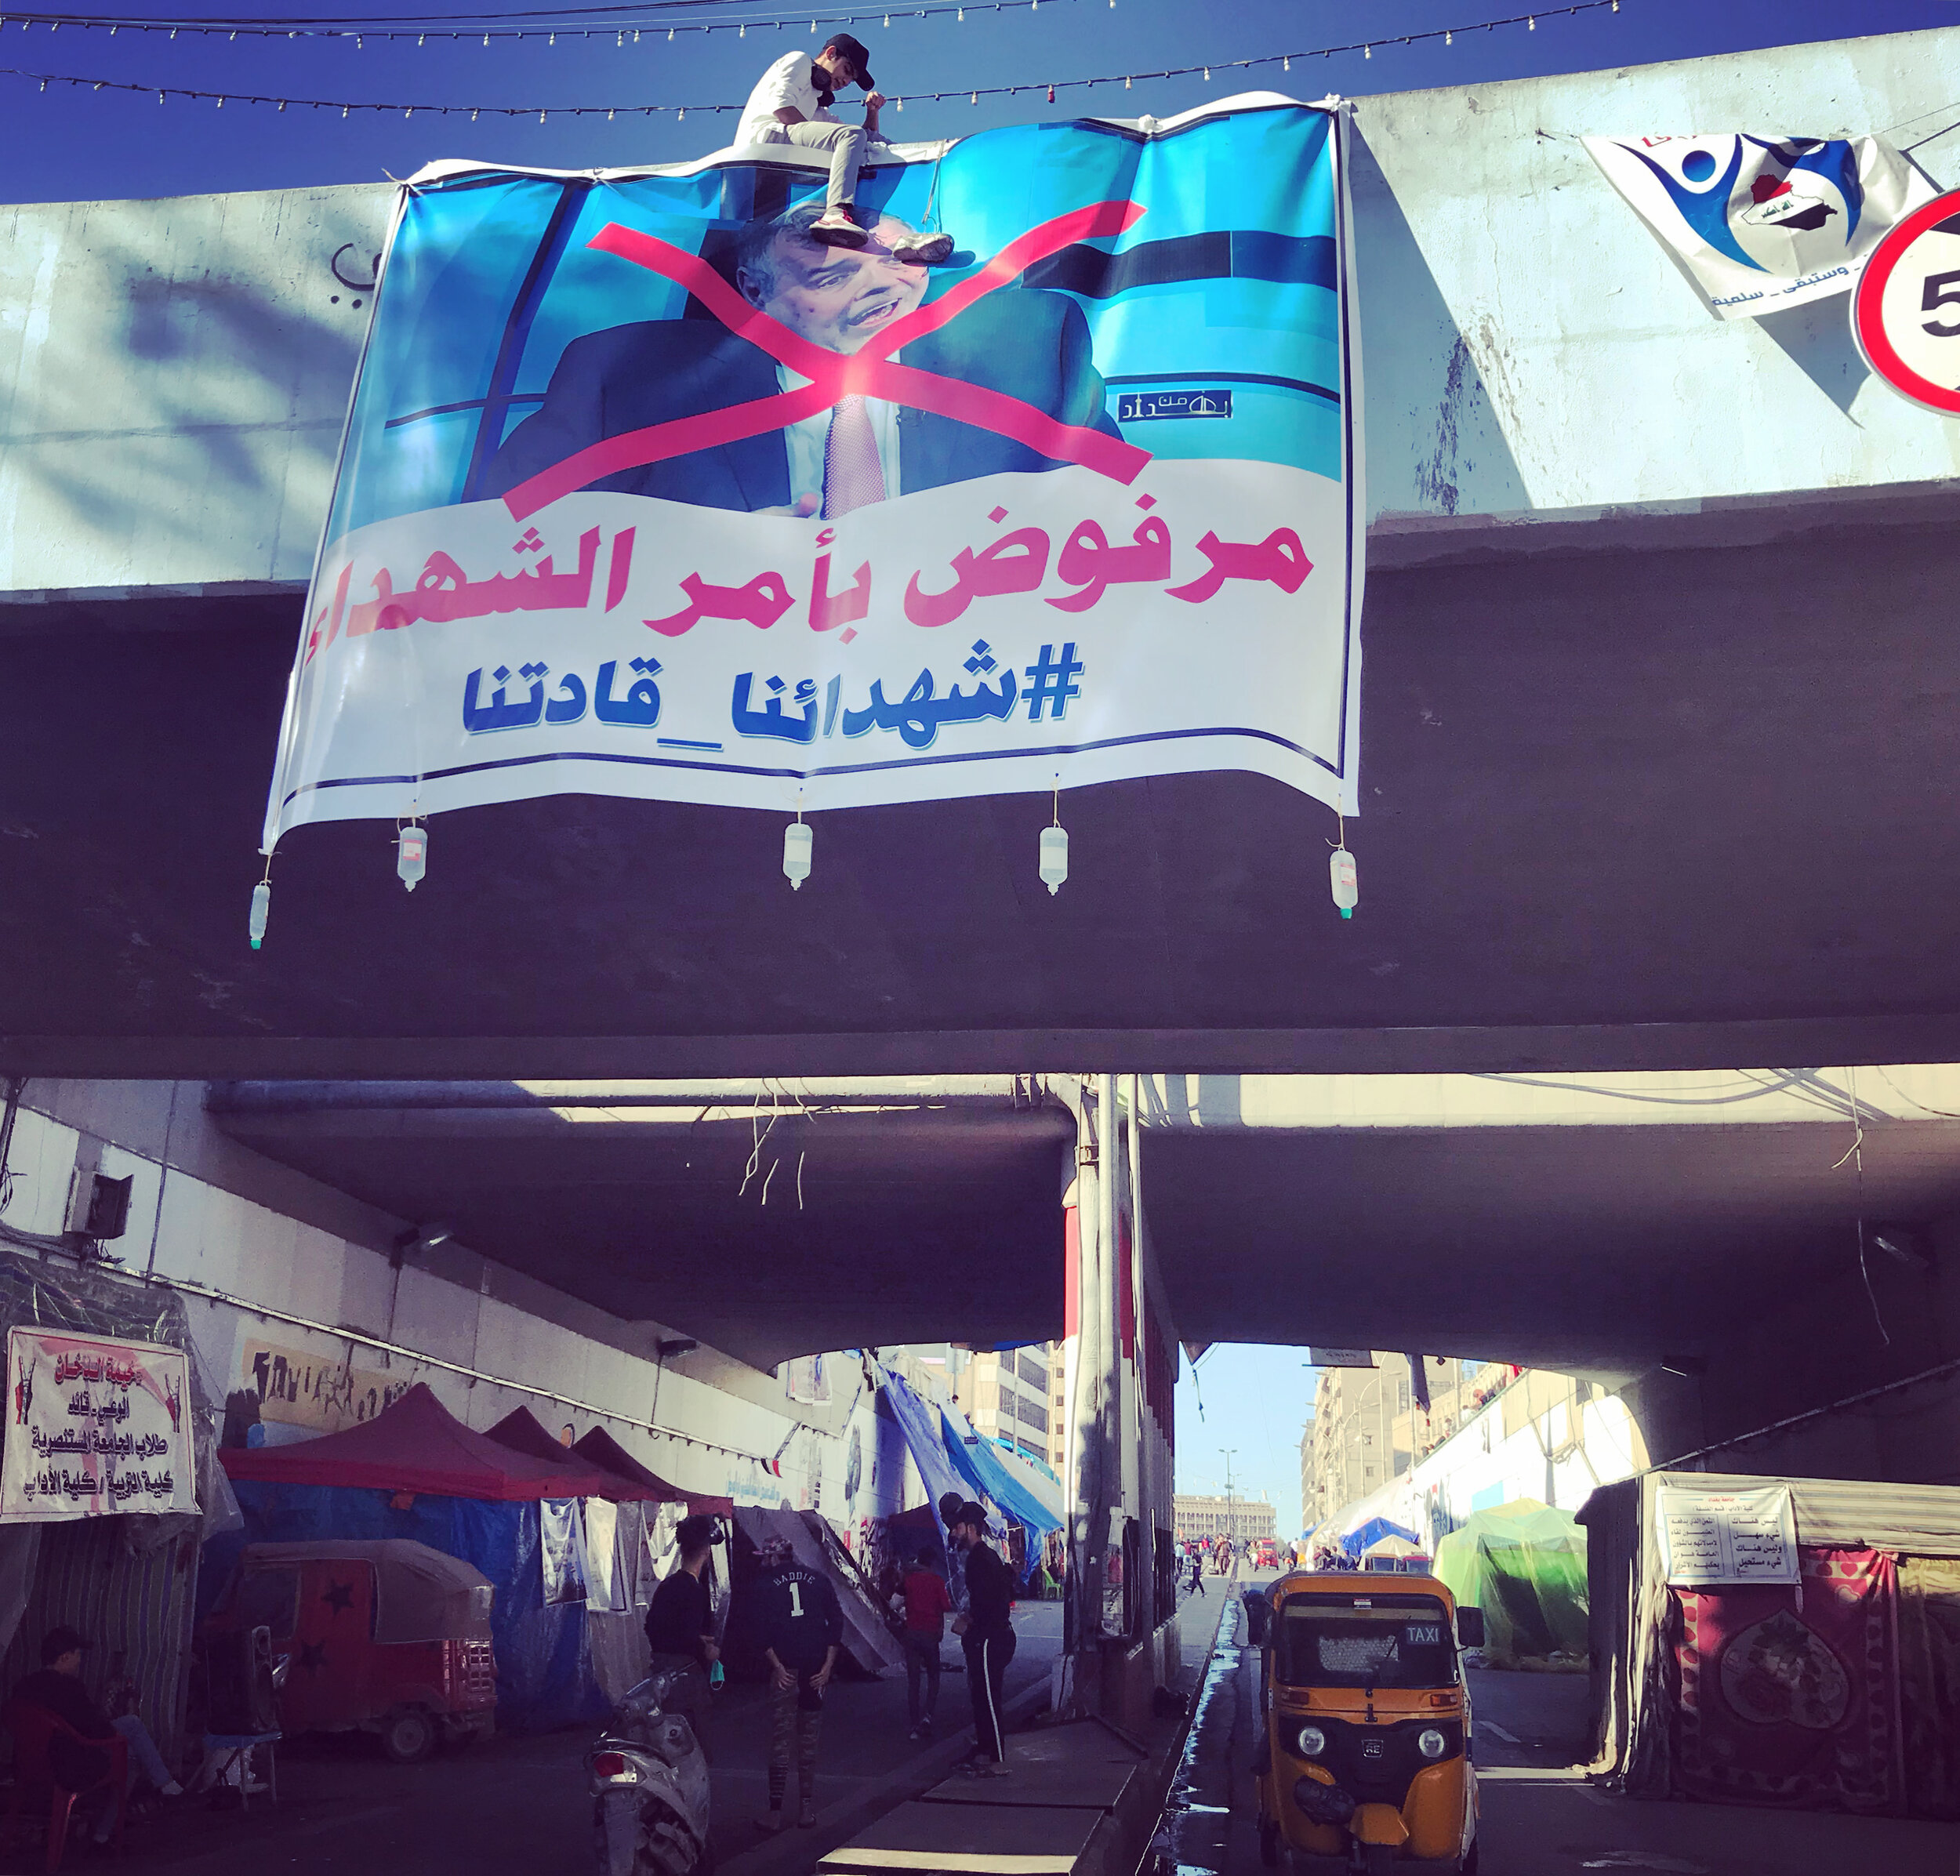  BAGHDAD | Hundreds of students voiced their rejection of Allawi at rallies in Baghdad's central plazas and in southern Iraq. Protesters hung portraits of Allawi marked with an “X” on bridges and tunnels around Tahrir Square, the epicenter of the fou